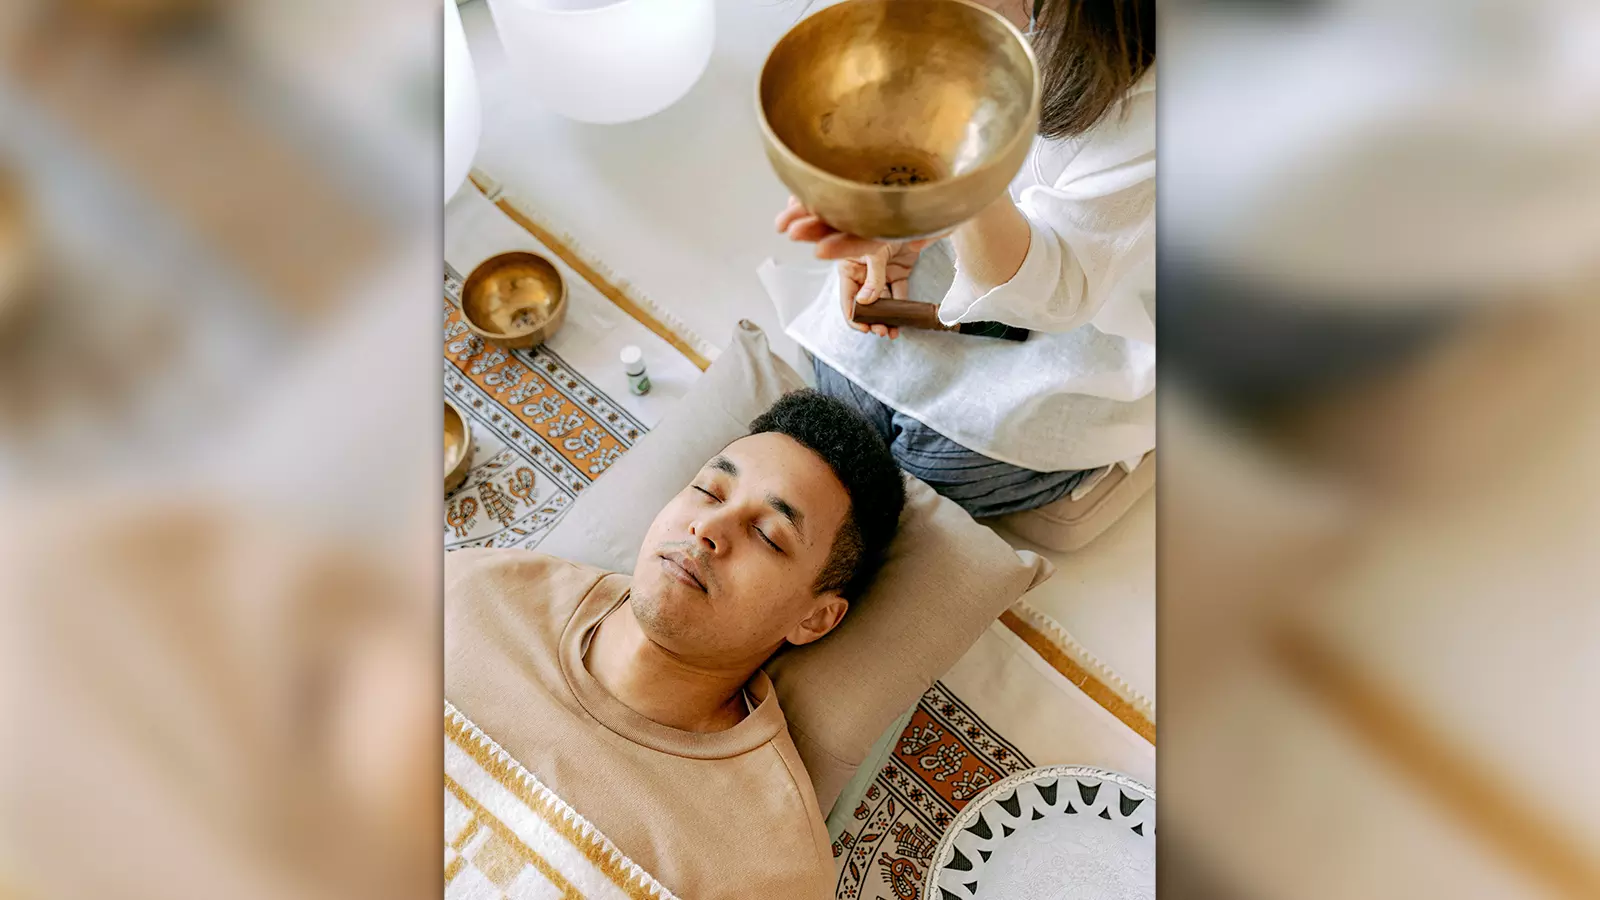 Sound healing uses various sound frequencies to harmonise the mind, body, and spirit.